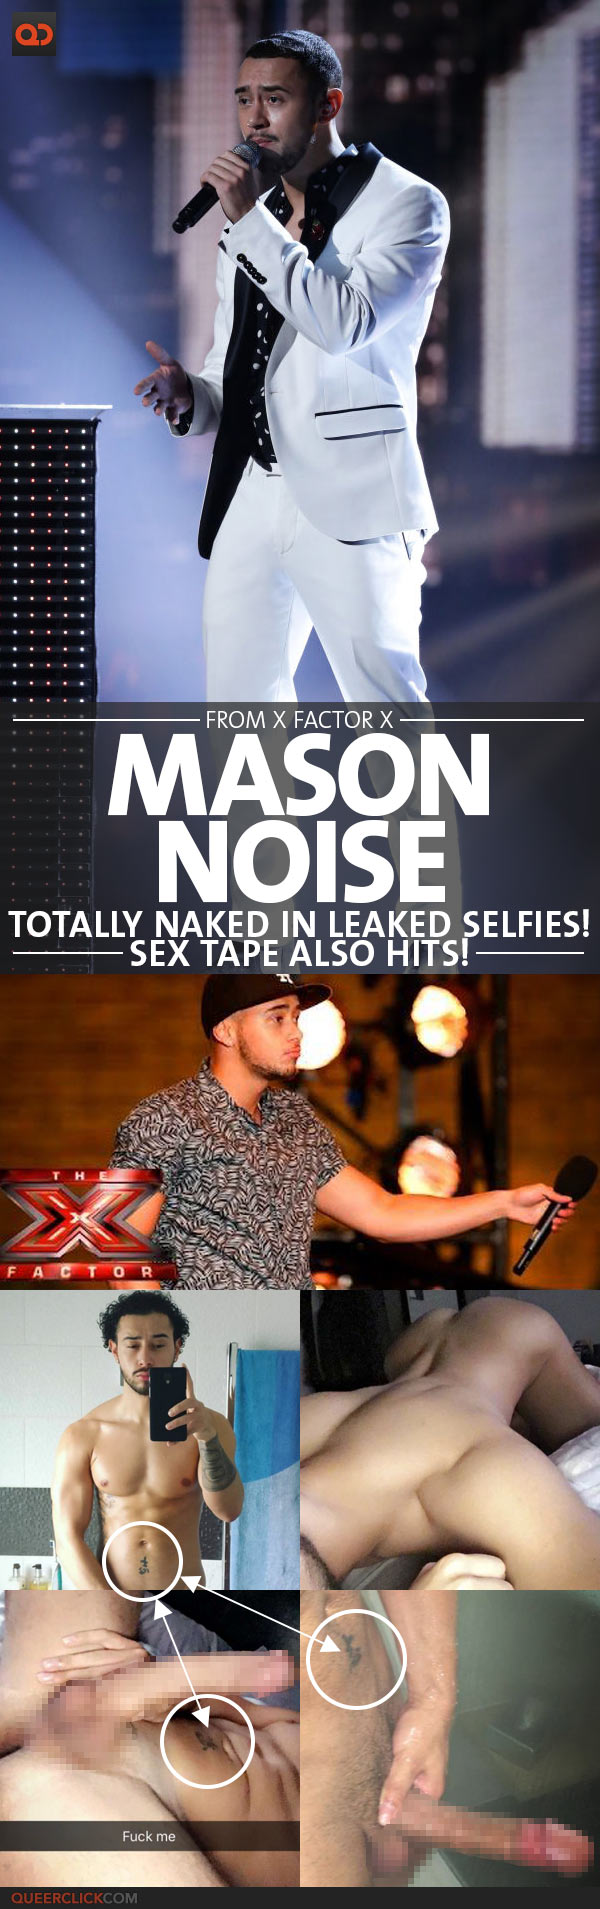 X Factor Sex Video - Mason Noise, From X Factor UK, Totally Naked In Leaked Selfies! - Sex Tape  Also Hits! - QueerClick